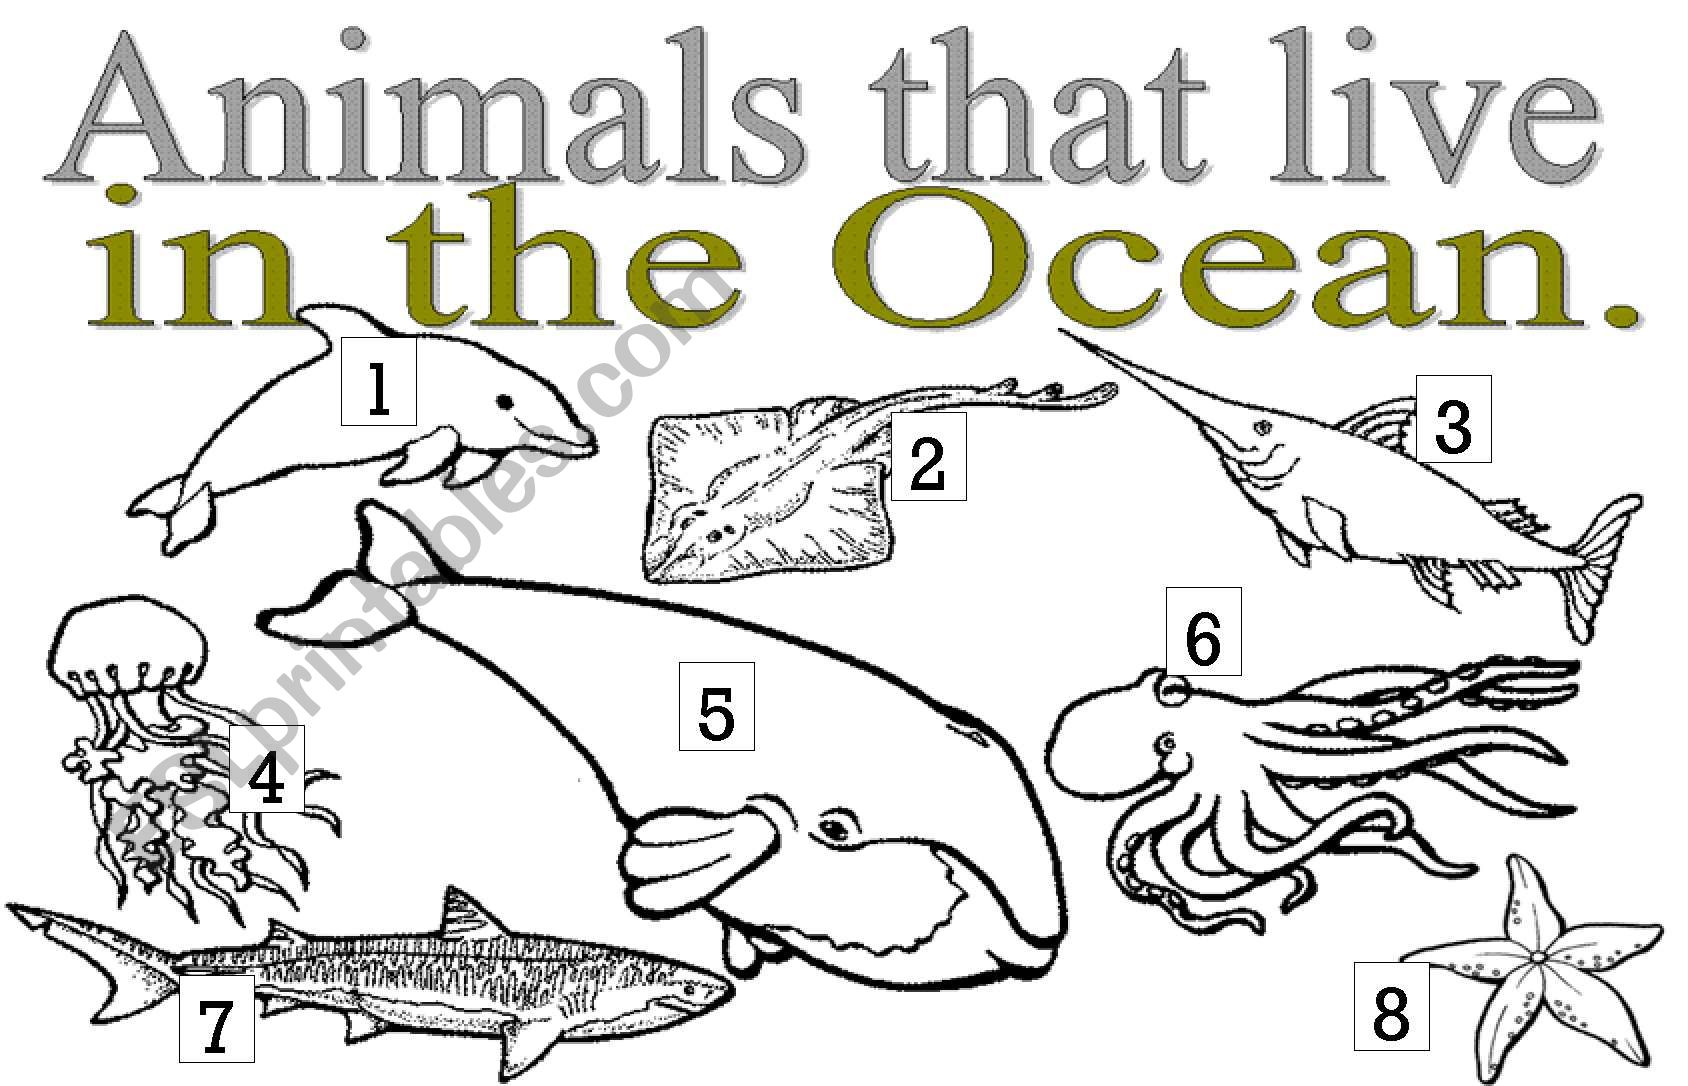 ANIMALS THAT LIVE IN THE OCEAN